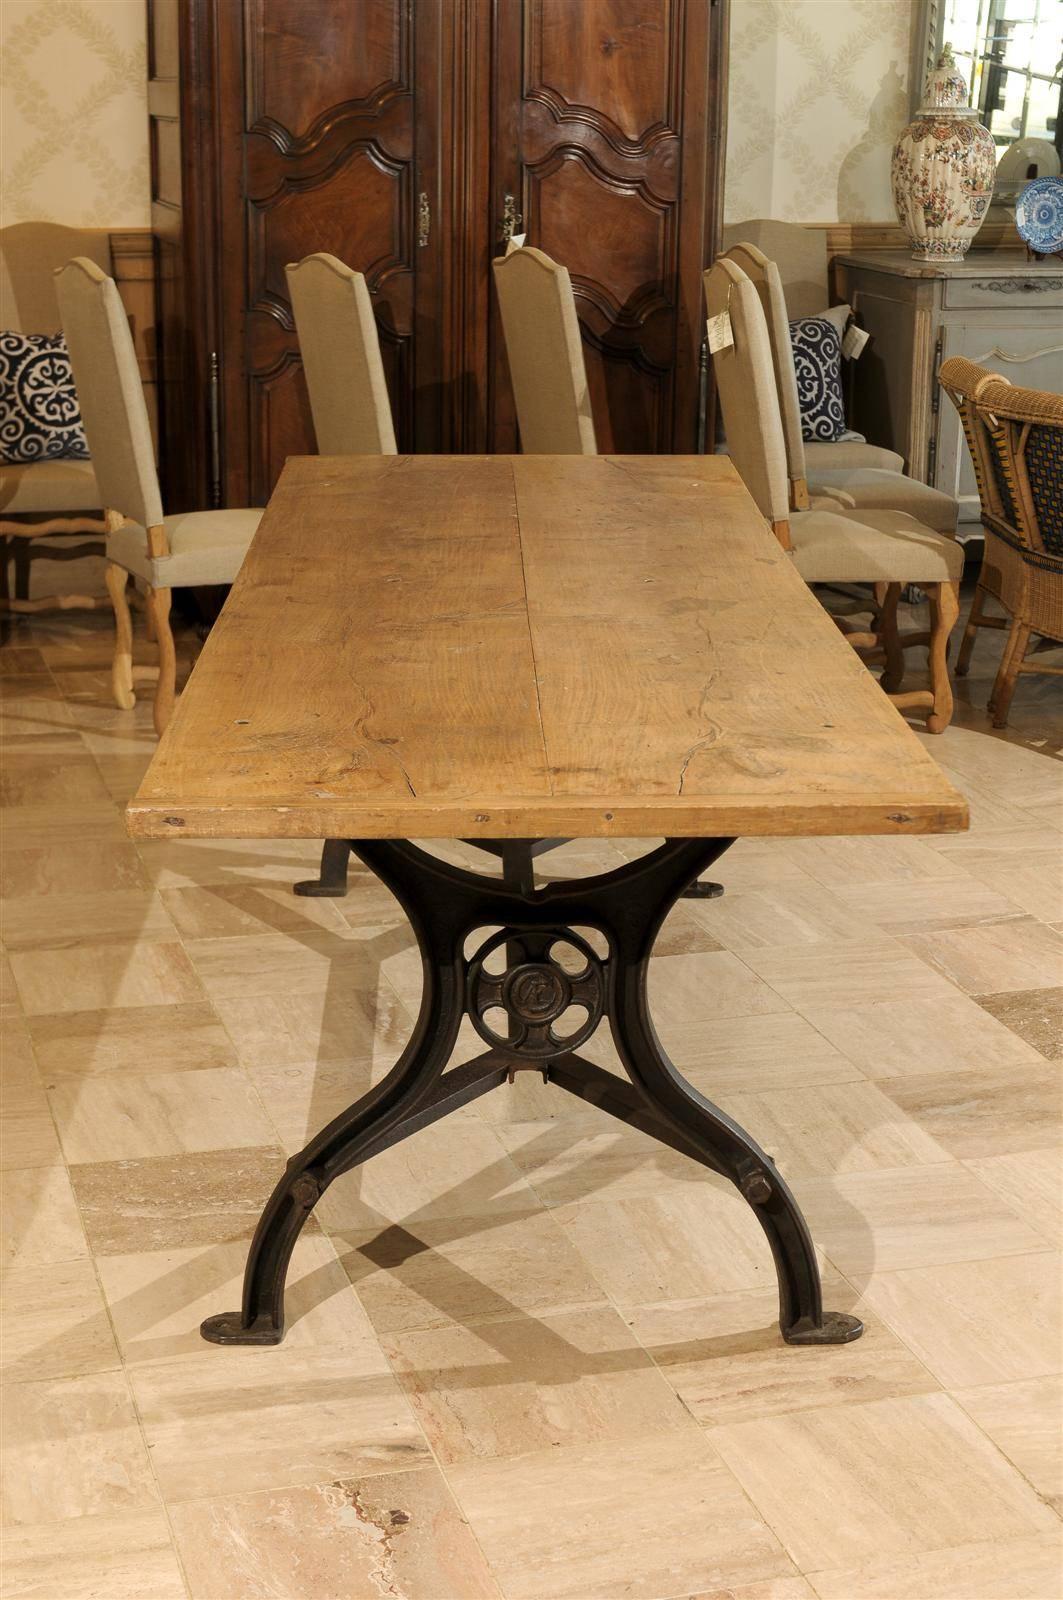 18th Century Dining Table with Industrial Iron Base and an Old Wooden Top